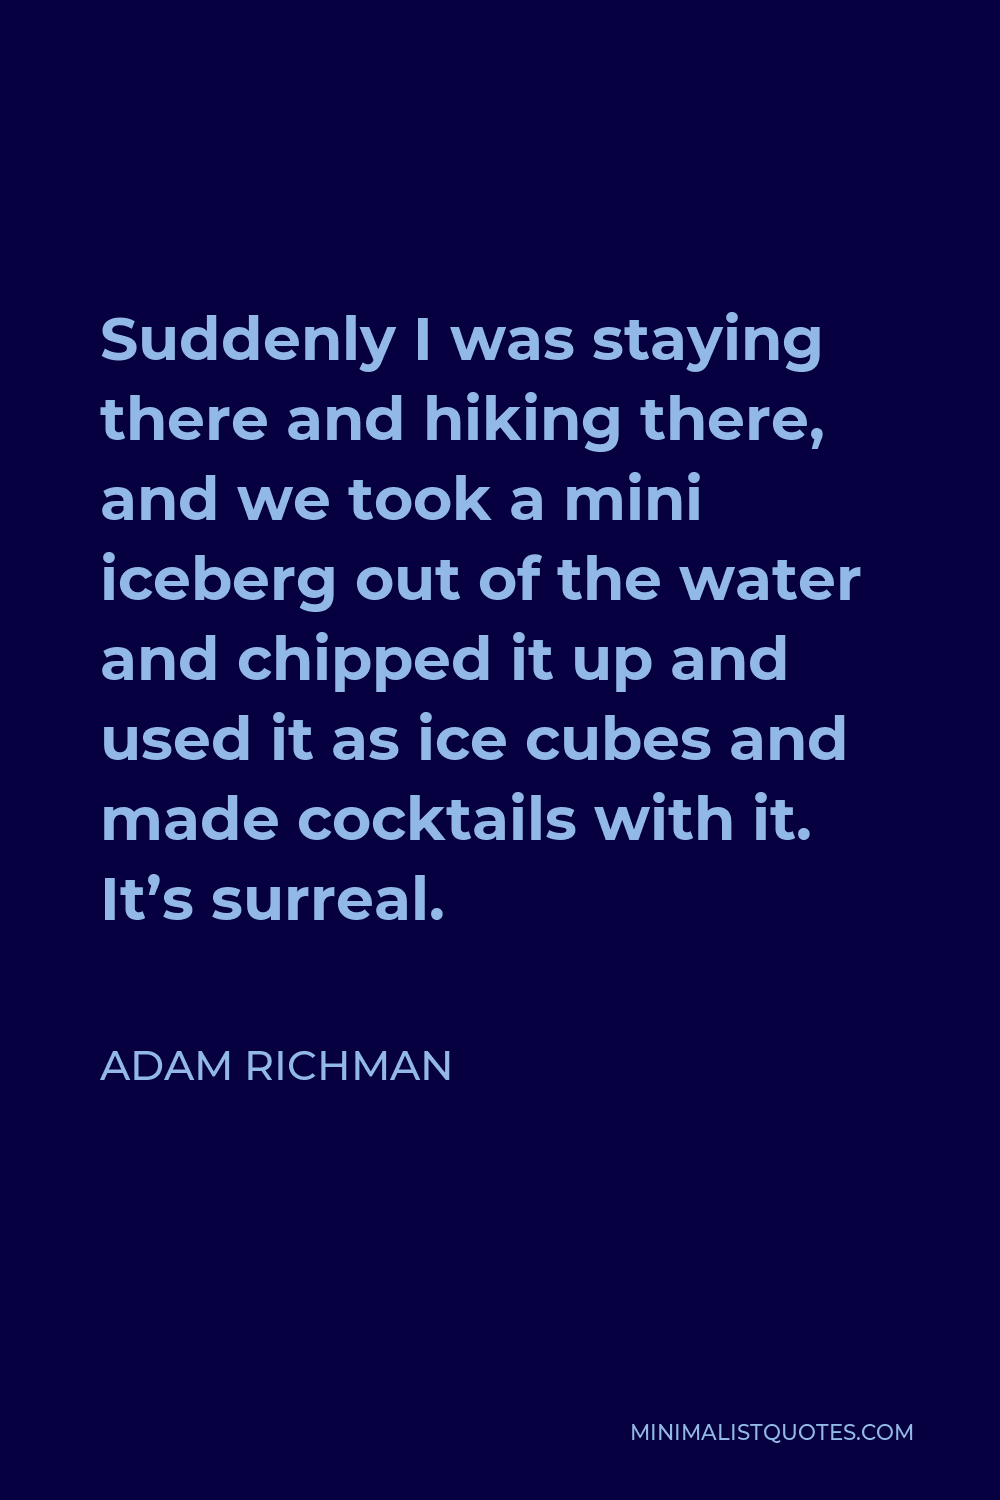 Adam Richman Quote - Suddenly I was staying there and hiking there, and we took a mini iceberg out of the water and chipped it up and used it as ice cubes and made cocktails with it. It’s surreal.